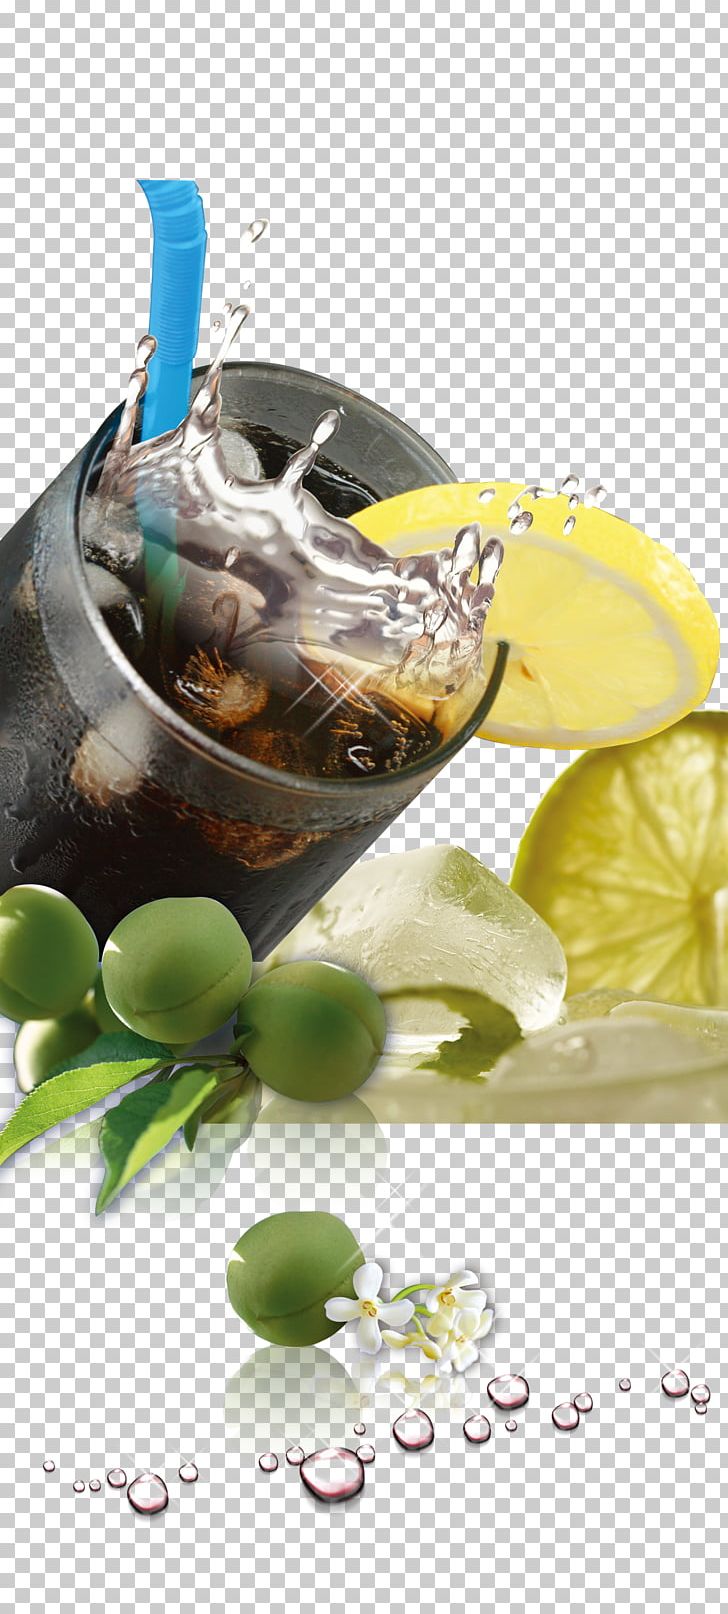 Long Island Iced Tea Lime Iced Coffee PNG, Clipart, Citrus, Drink, Drinks, Food, Food Drinks Free PNG Download